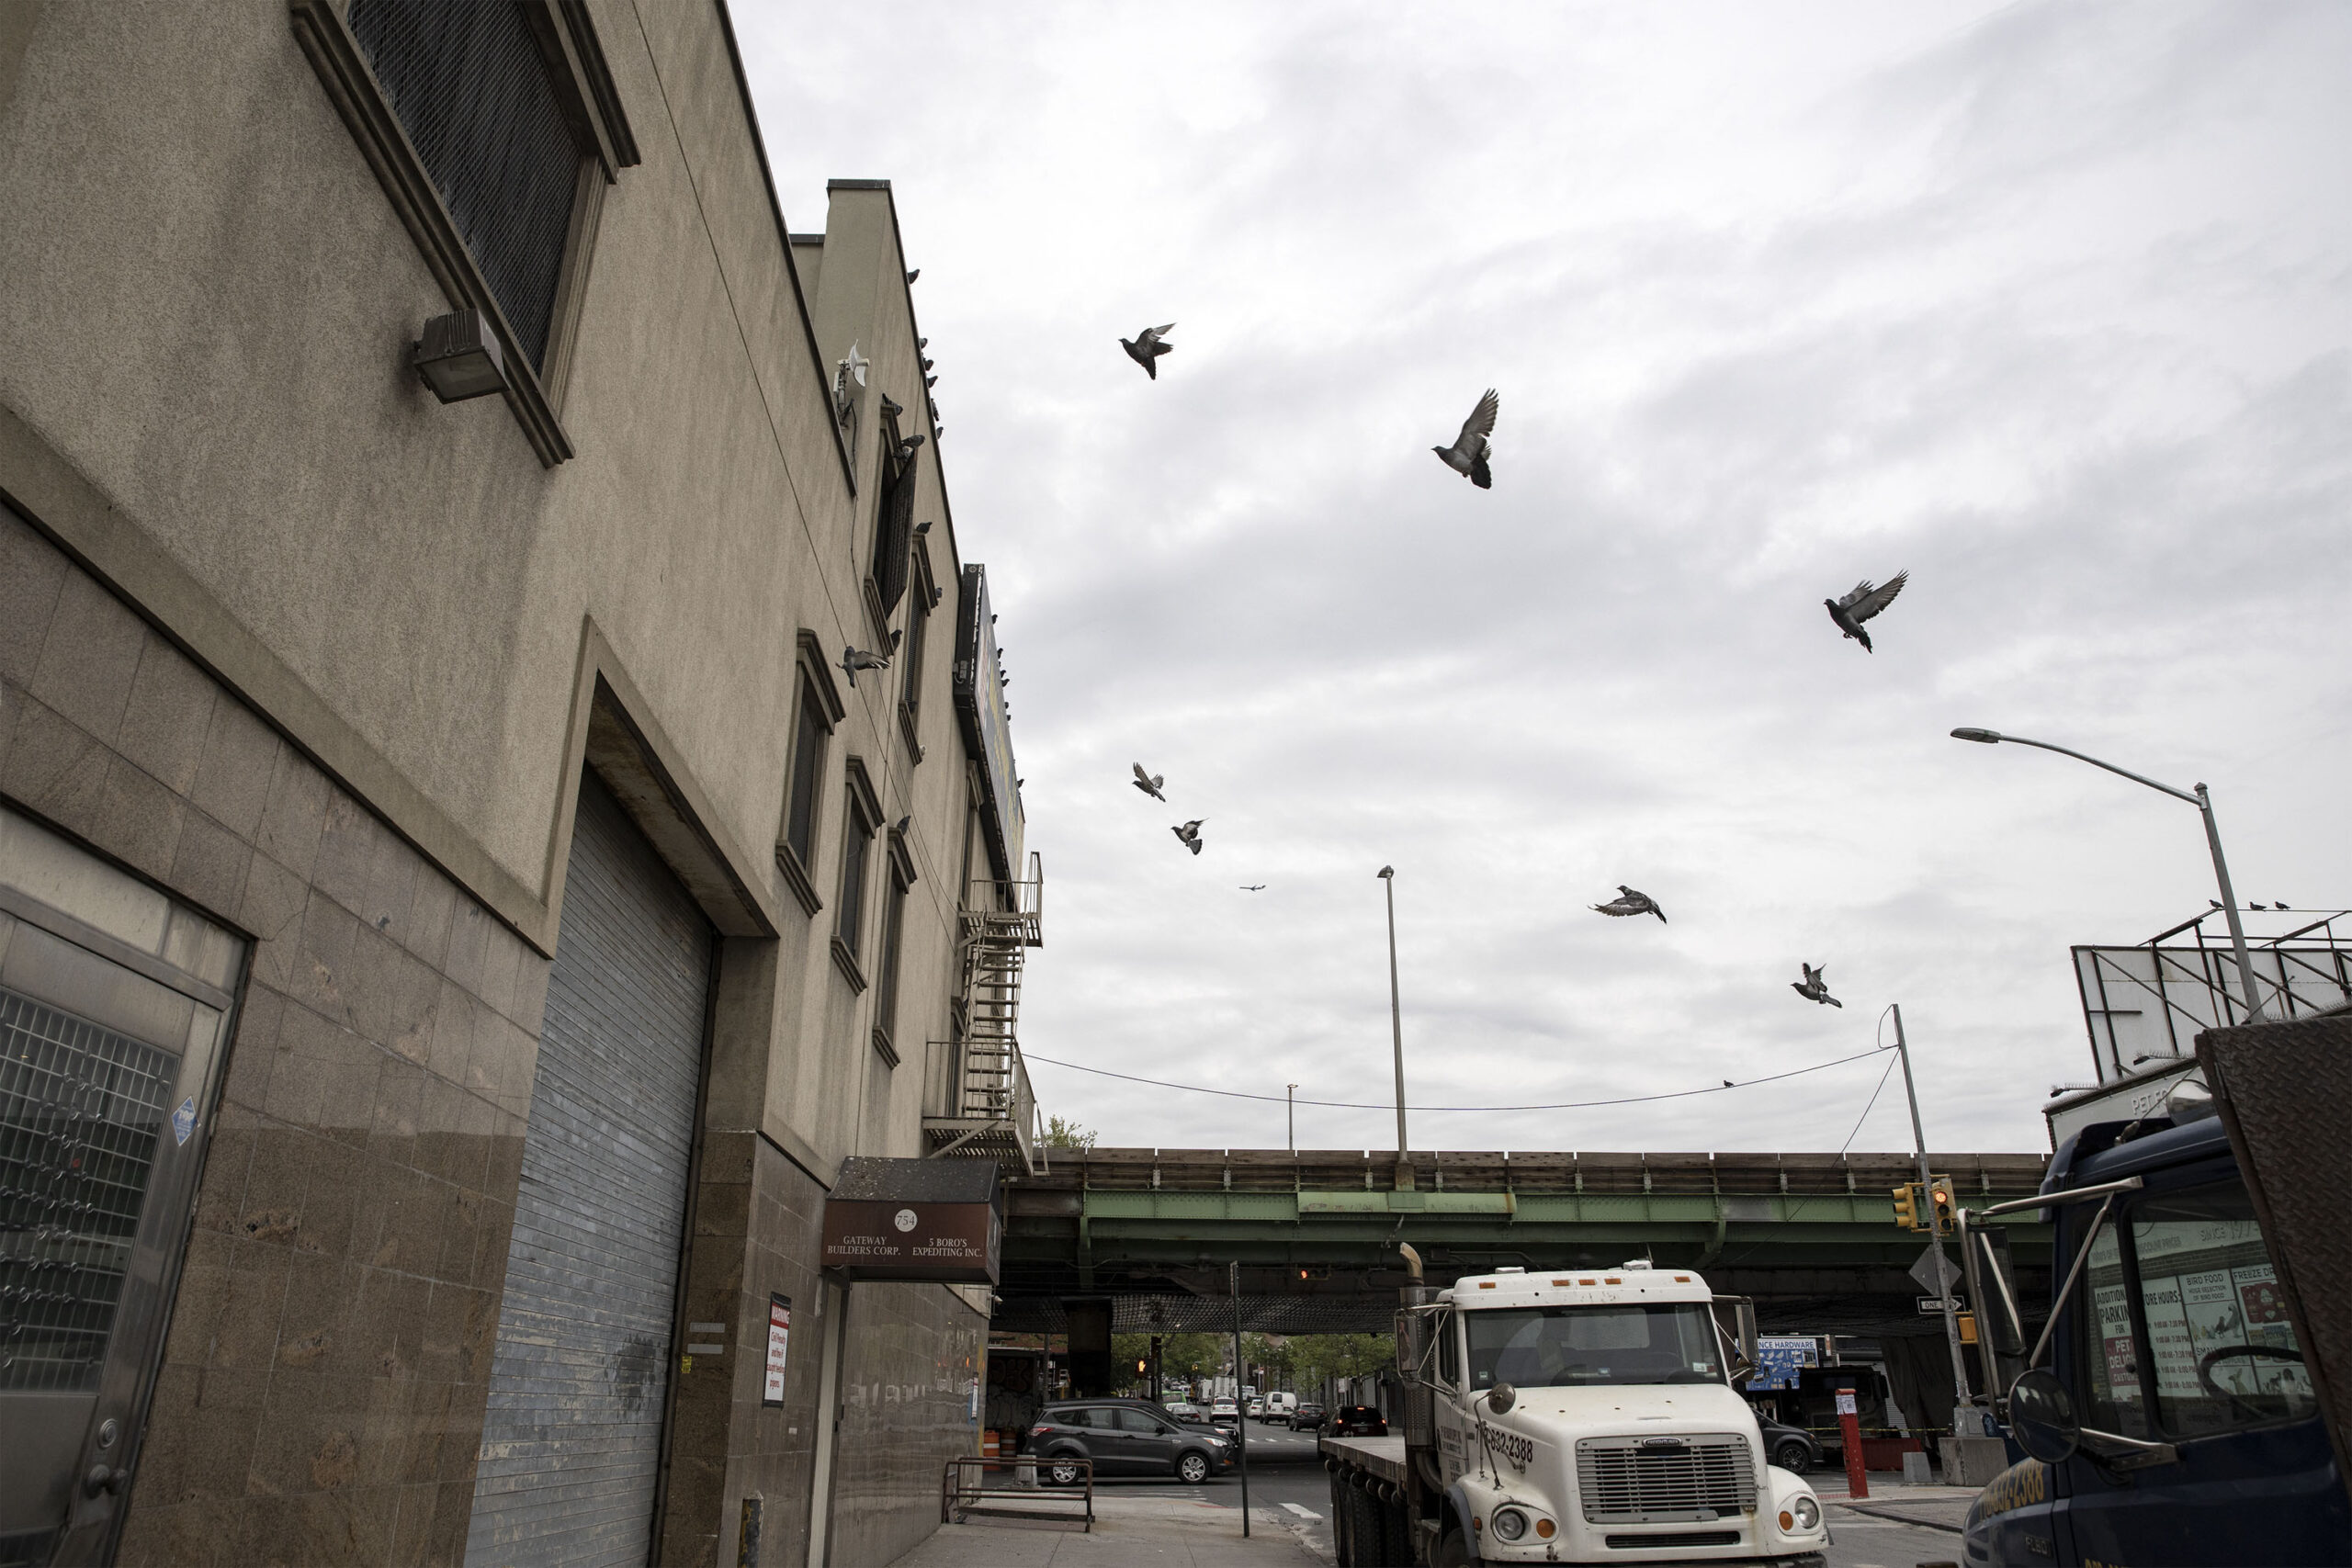 A group of pigeons flew next to the Gowanus Expressway, Brooklyn, New York City, on April 28, 2023. (Credit: Hongyu Liu)